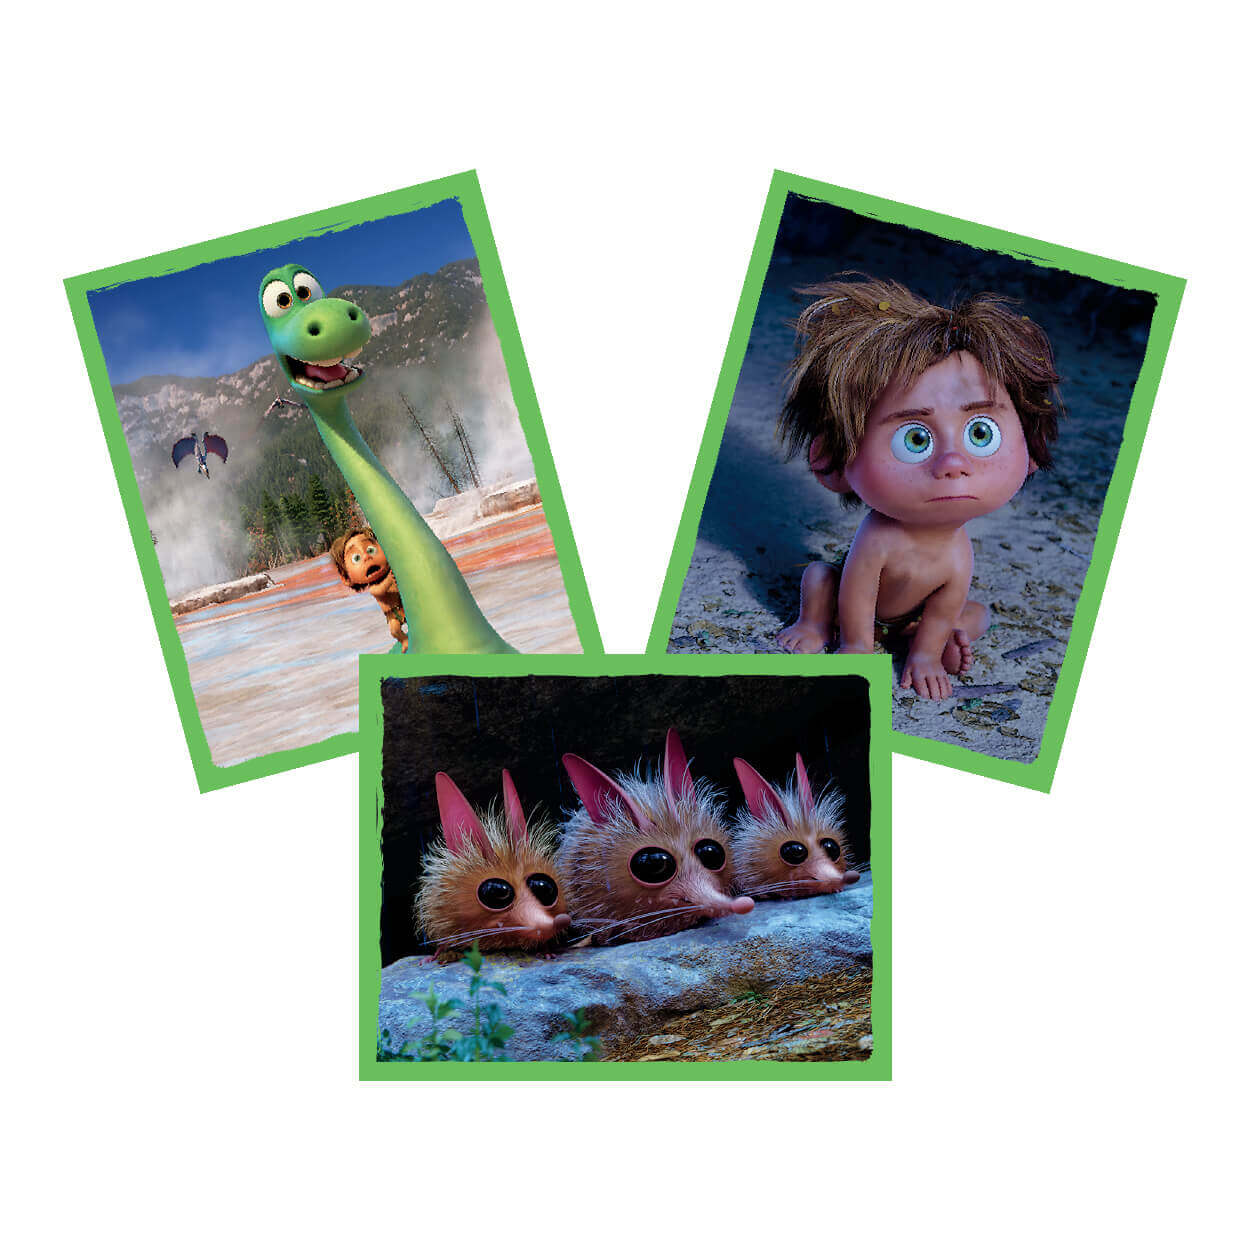 PaniniThe Good Dinosaur Sticker CollectionSticker CollectionEarthlets